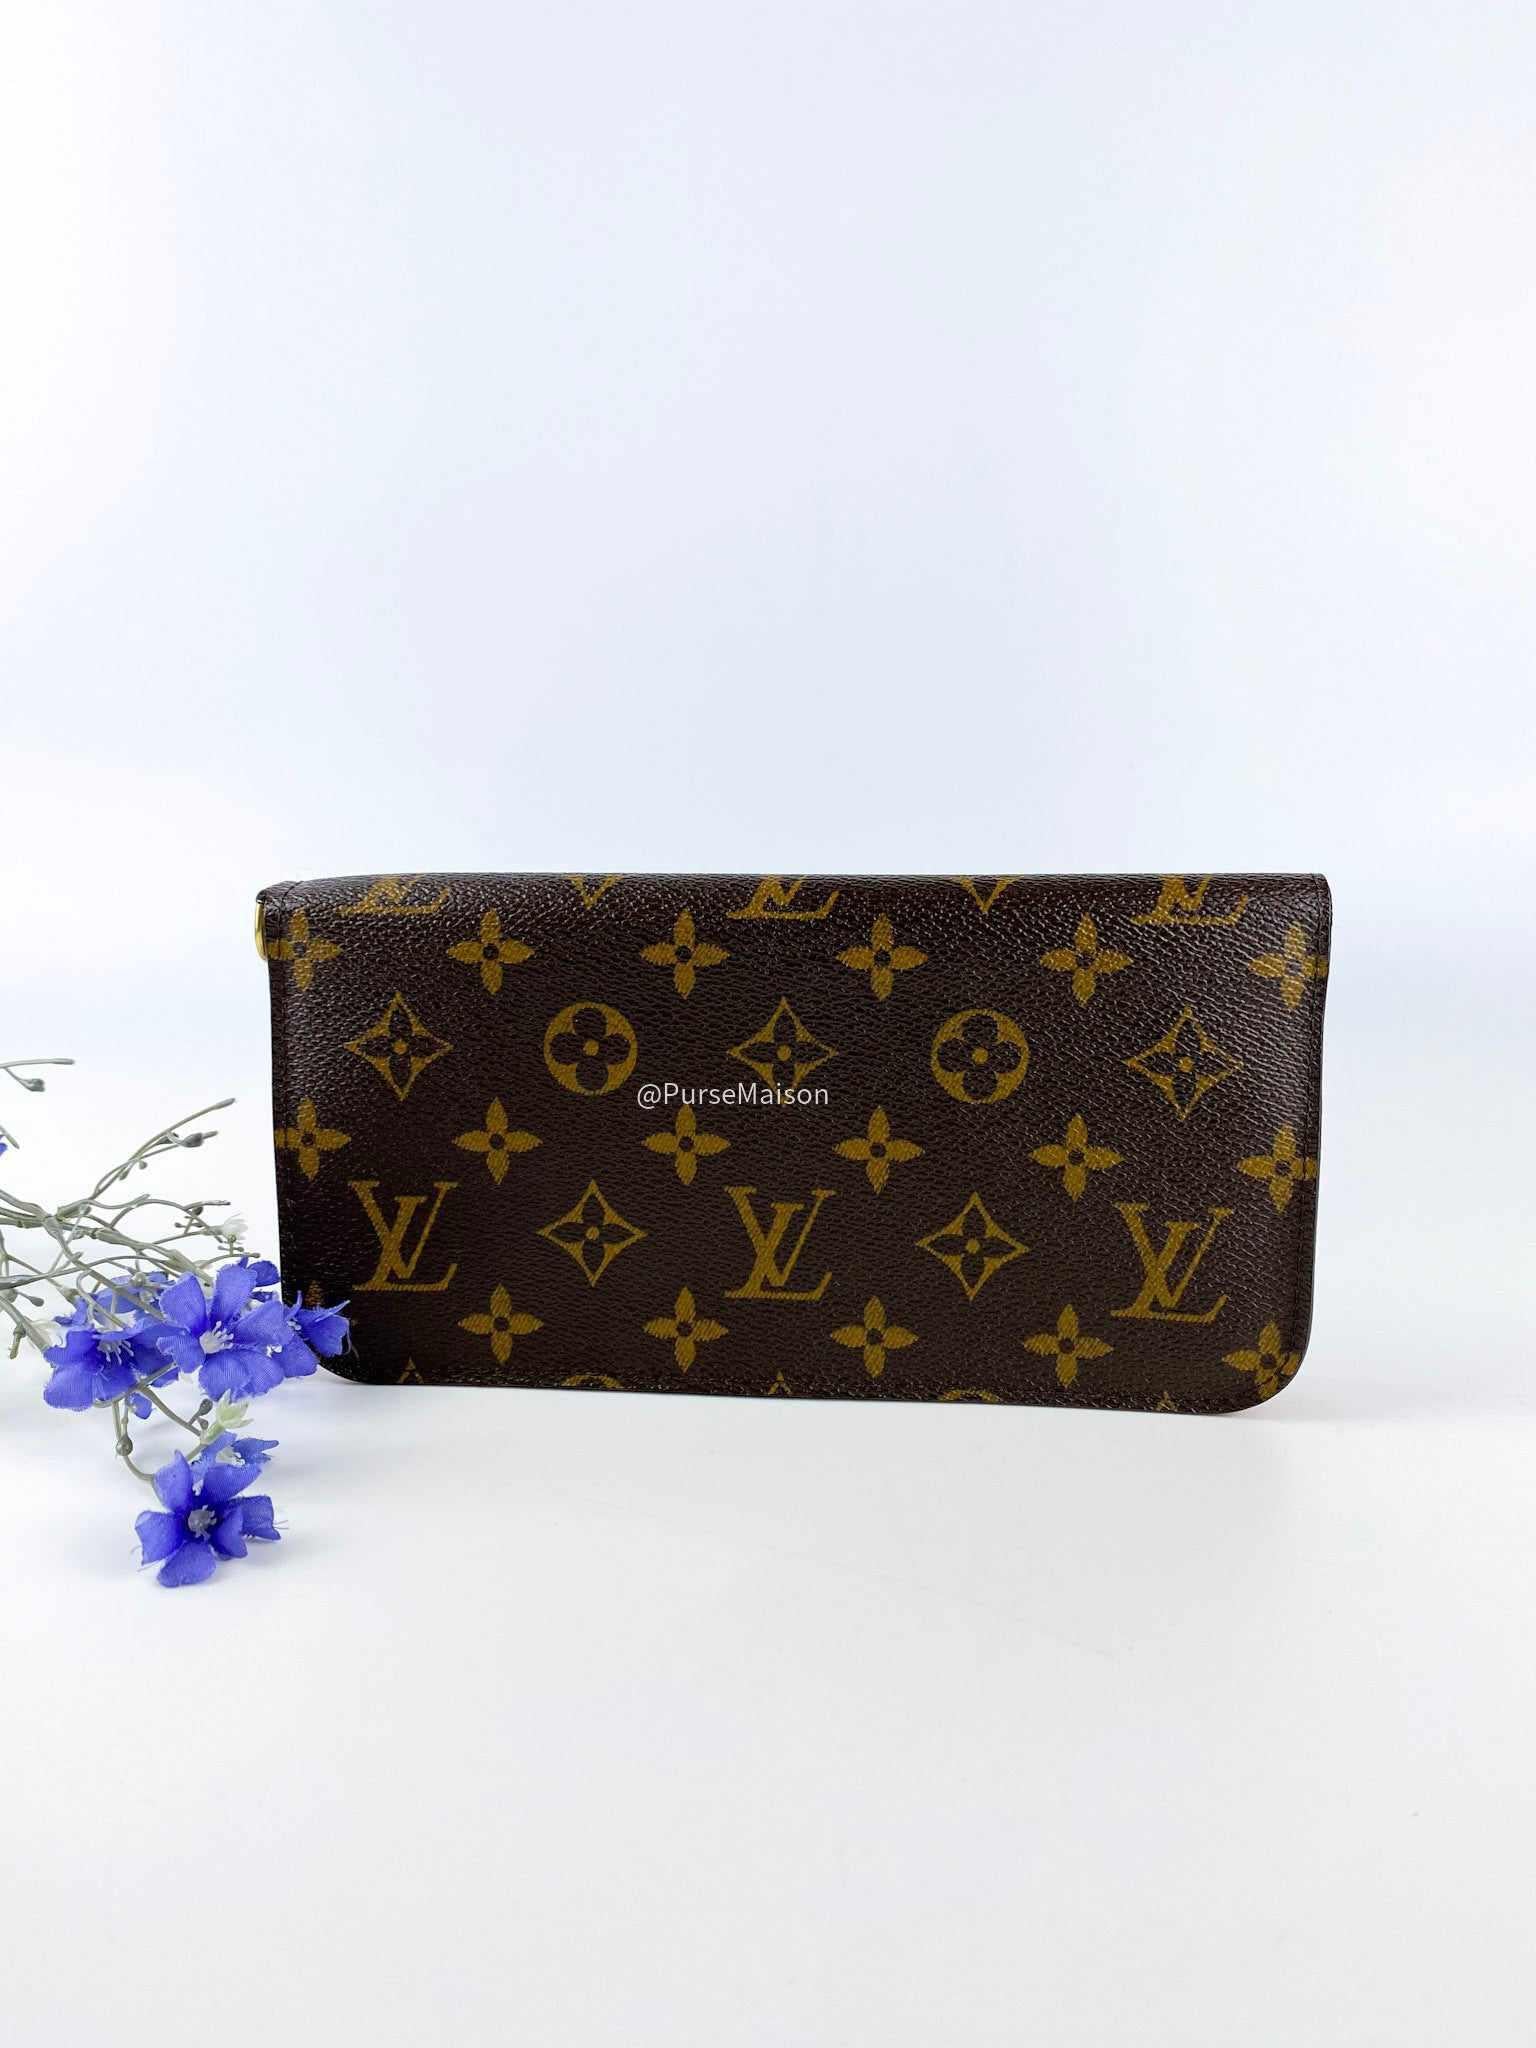 Louis Vuitton Insolite Wallet in Monogram Canvas and Red Interior (Date Code: CA4058)